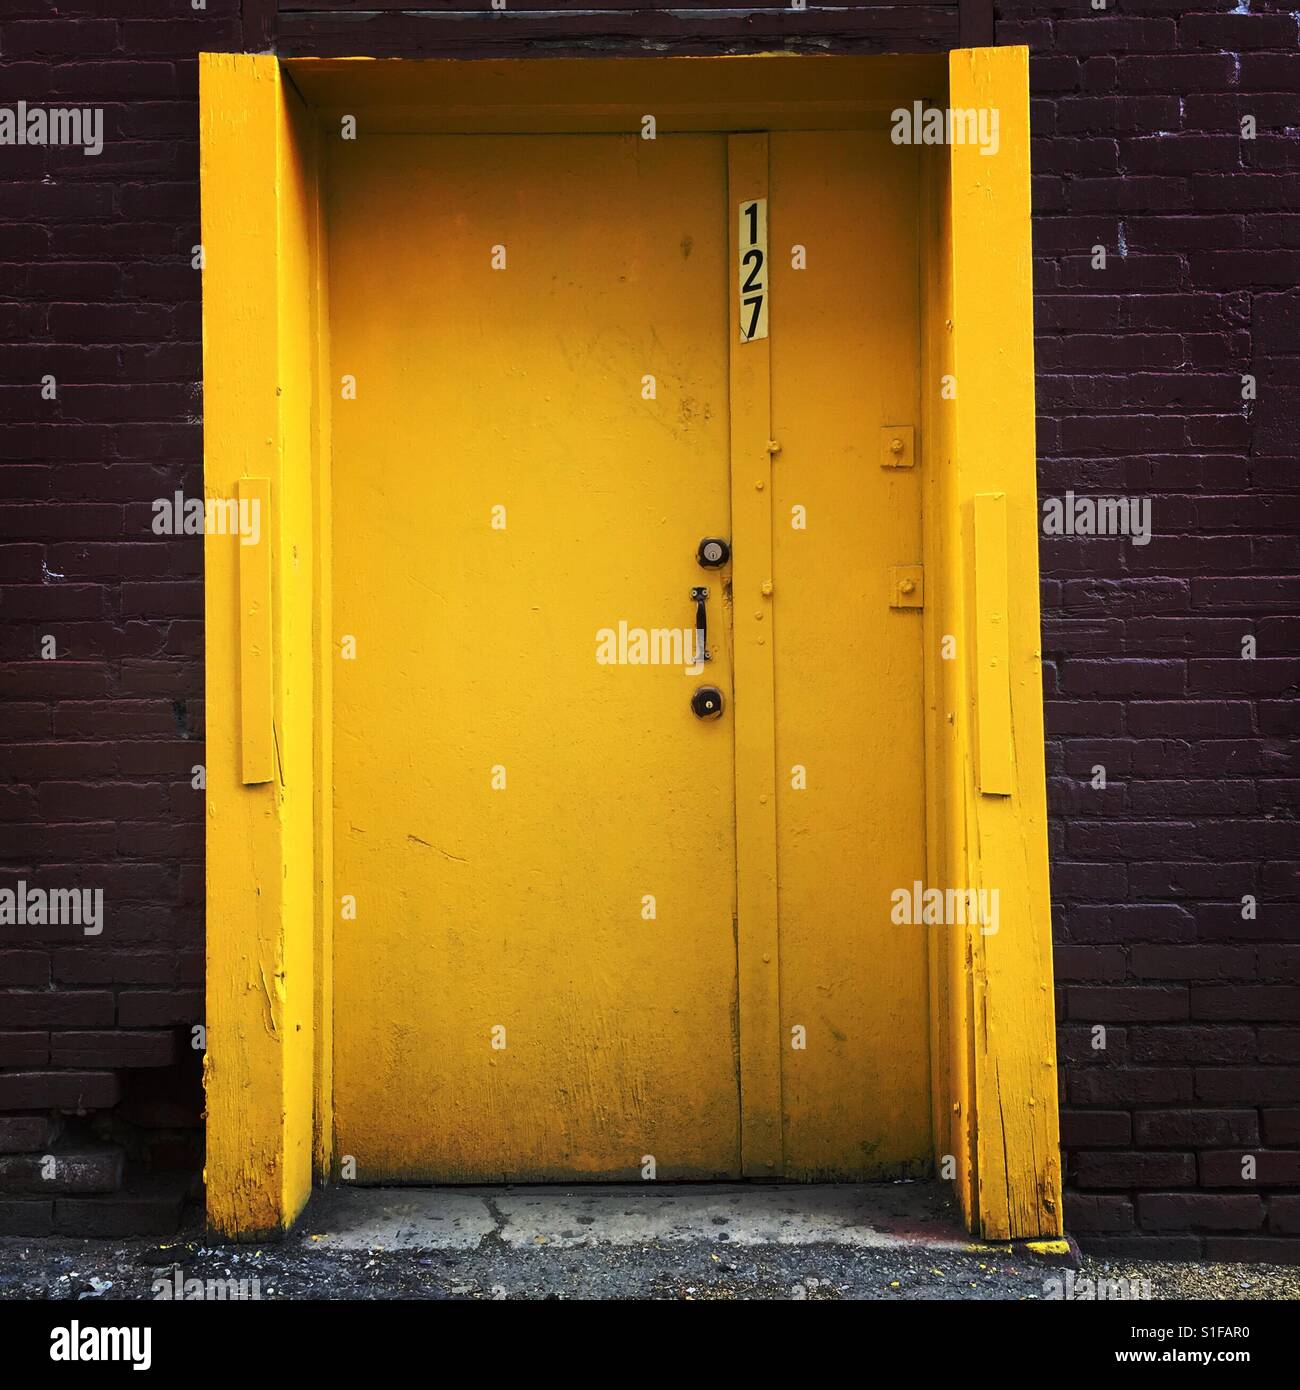 The number 127 on a yellow door surrounded by a brick facade Stock Photo